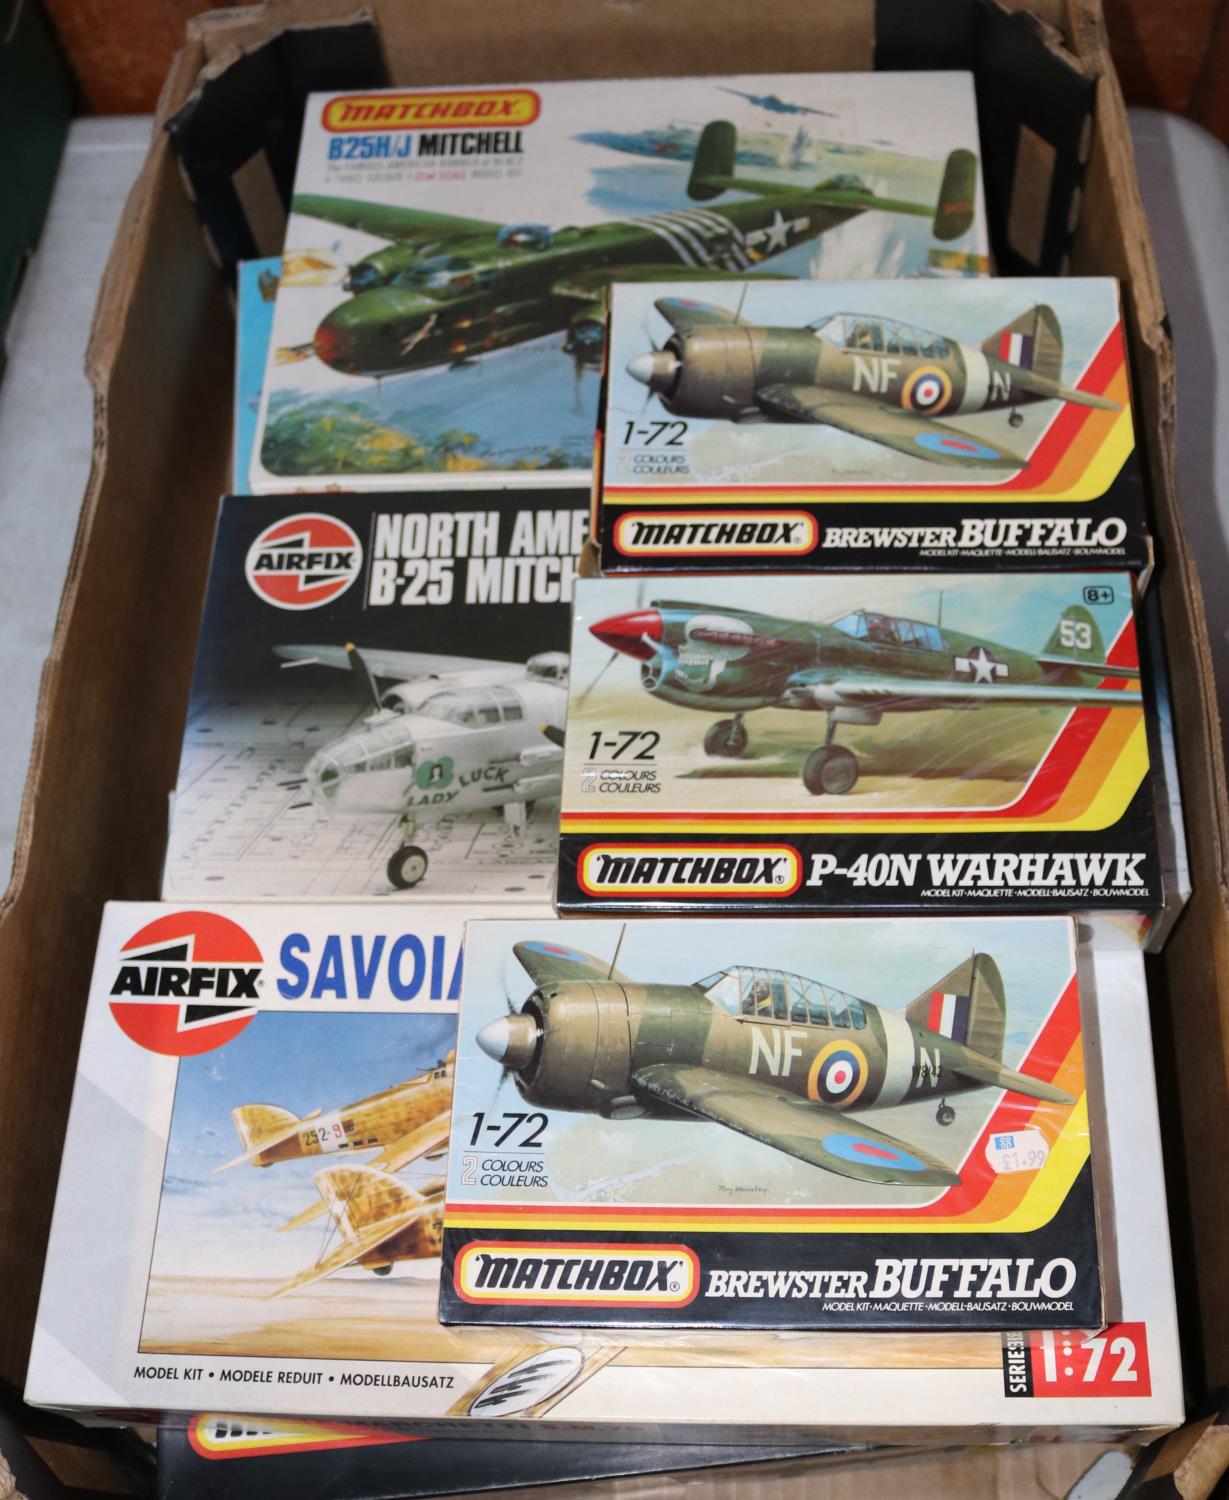 8 Matchbox and Airfix unmade 1:72 scale Kits. 6 Matchbox- Avro Lancaster, Boeing B-17G Flying